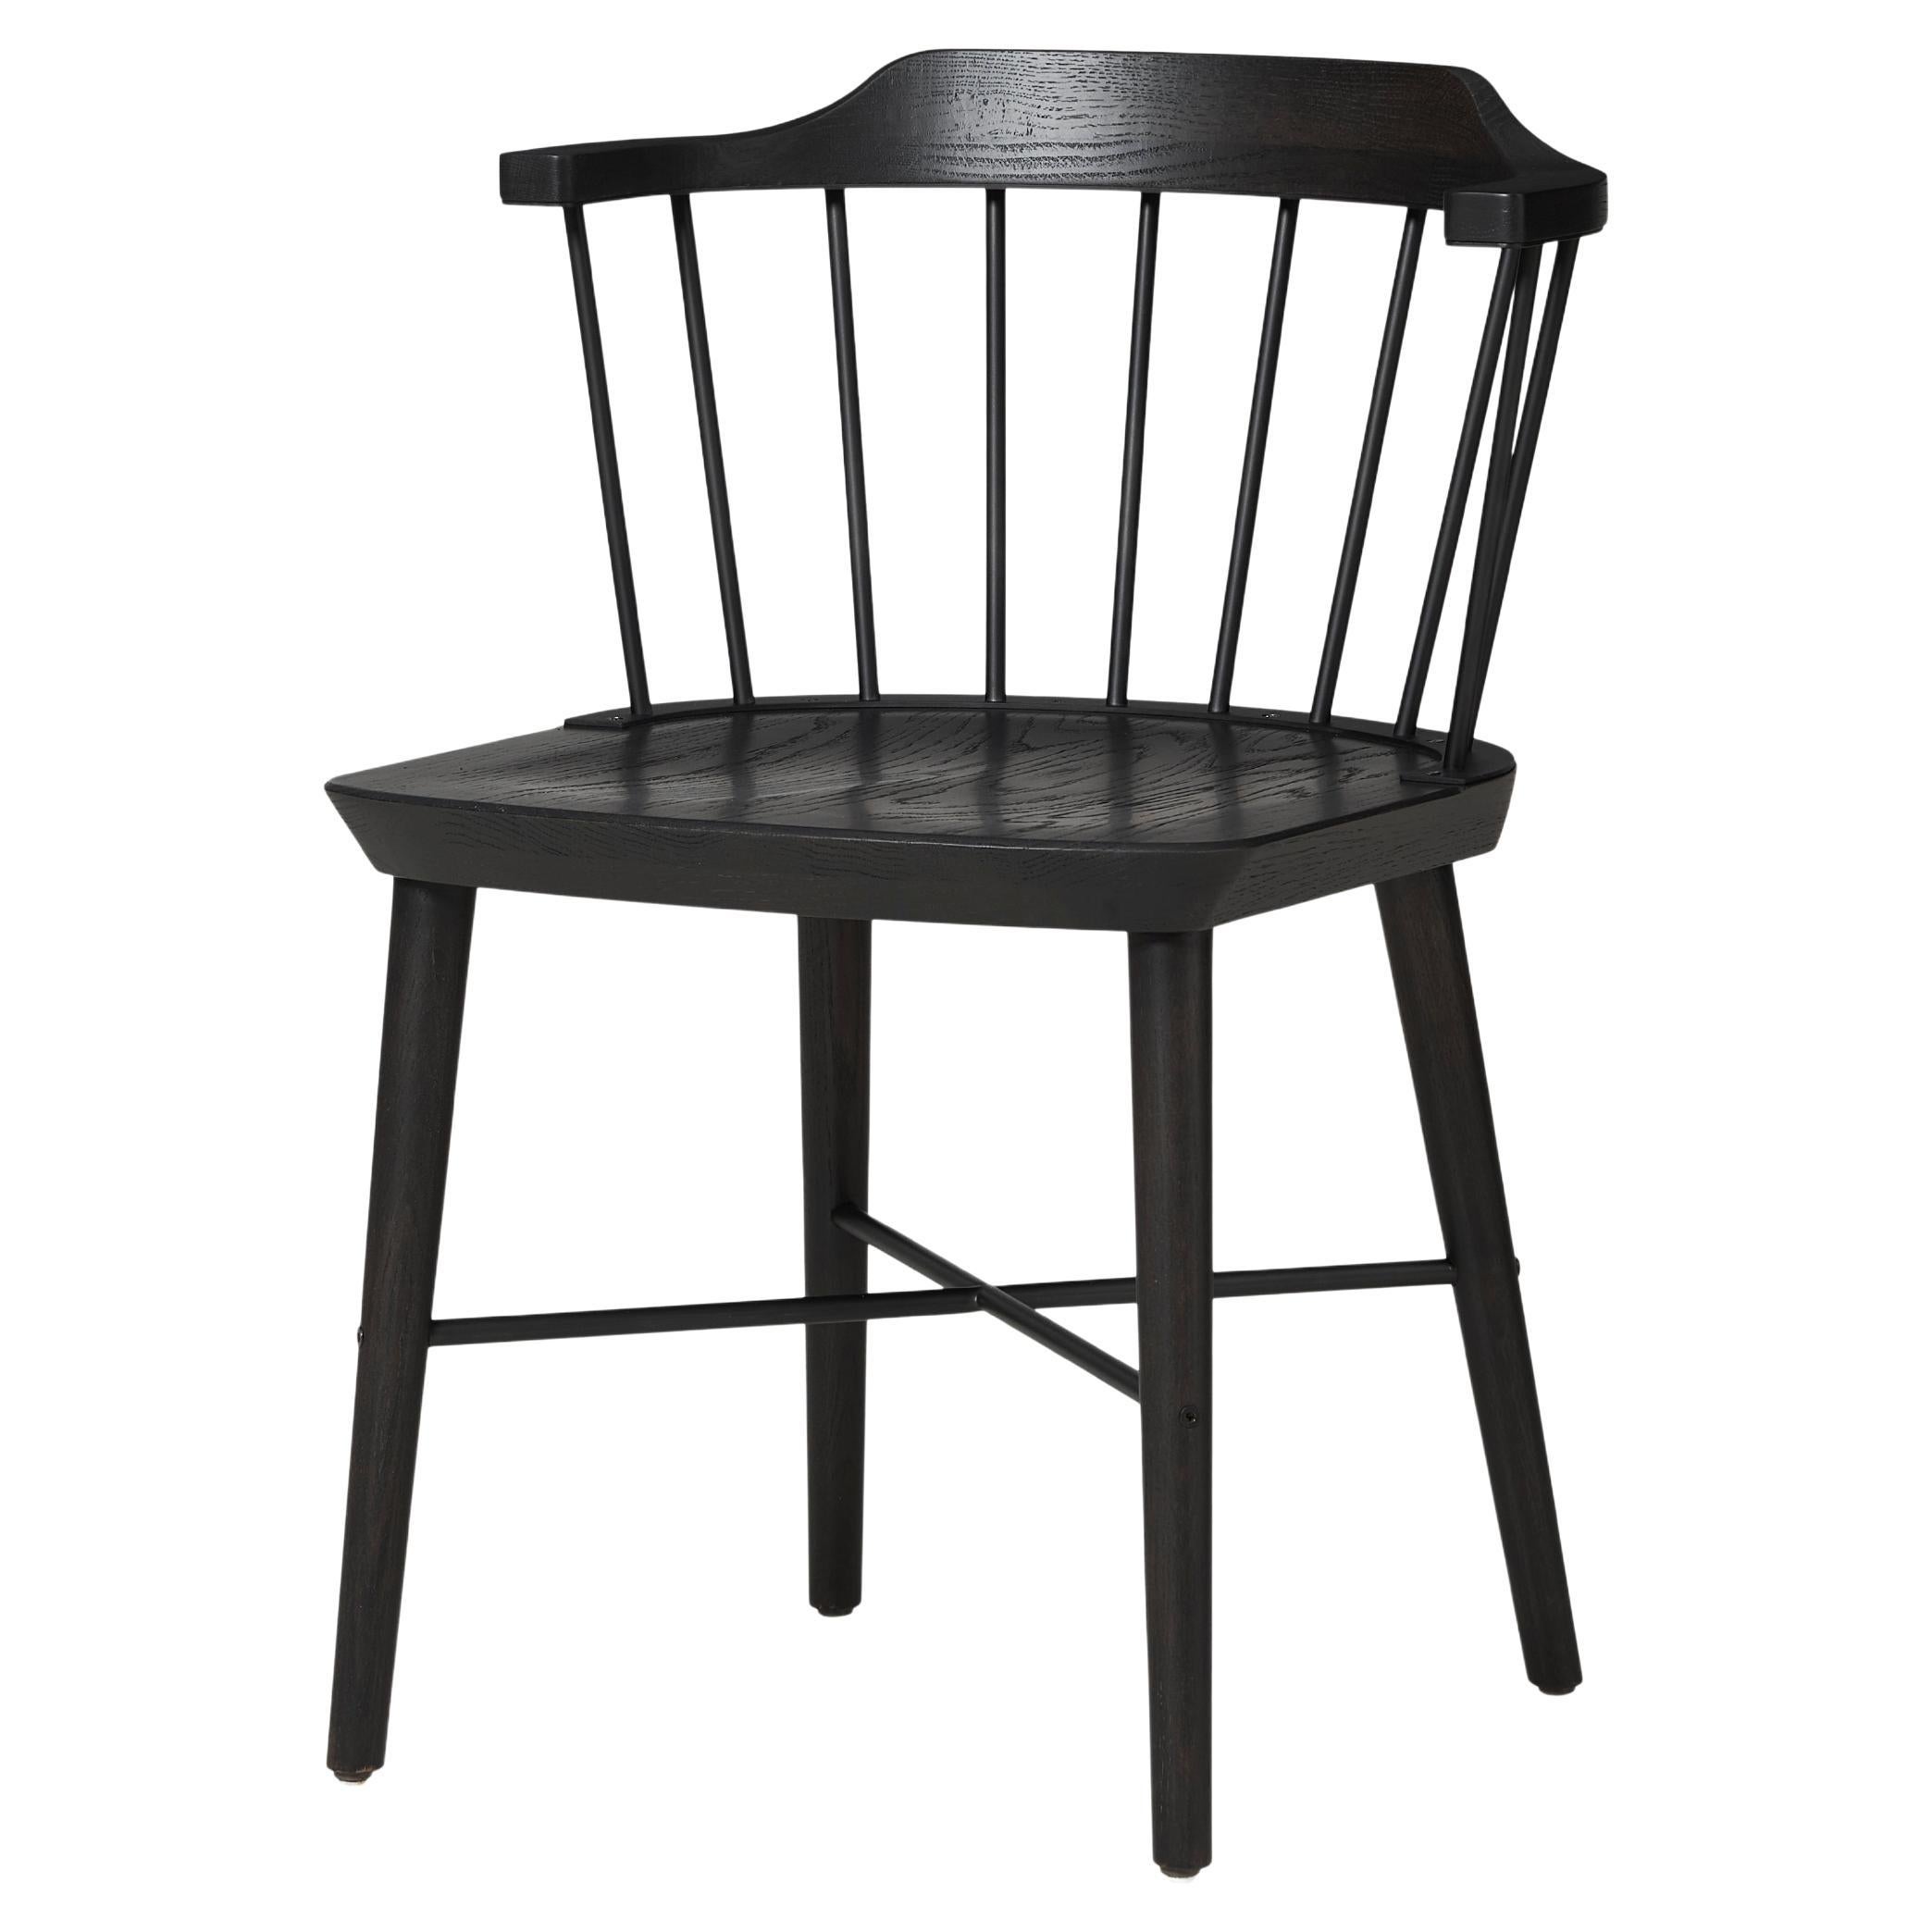 Onyx Oak Dining Chair, Exchange For Sale